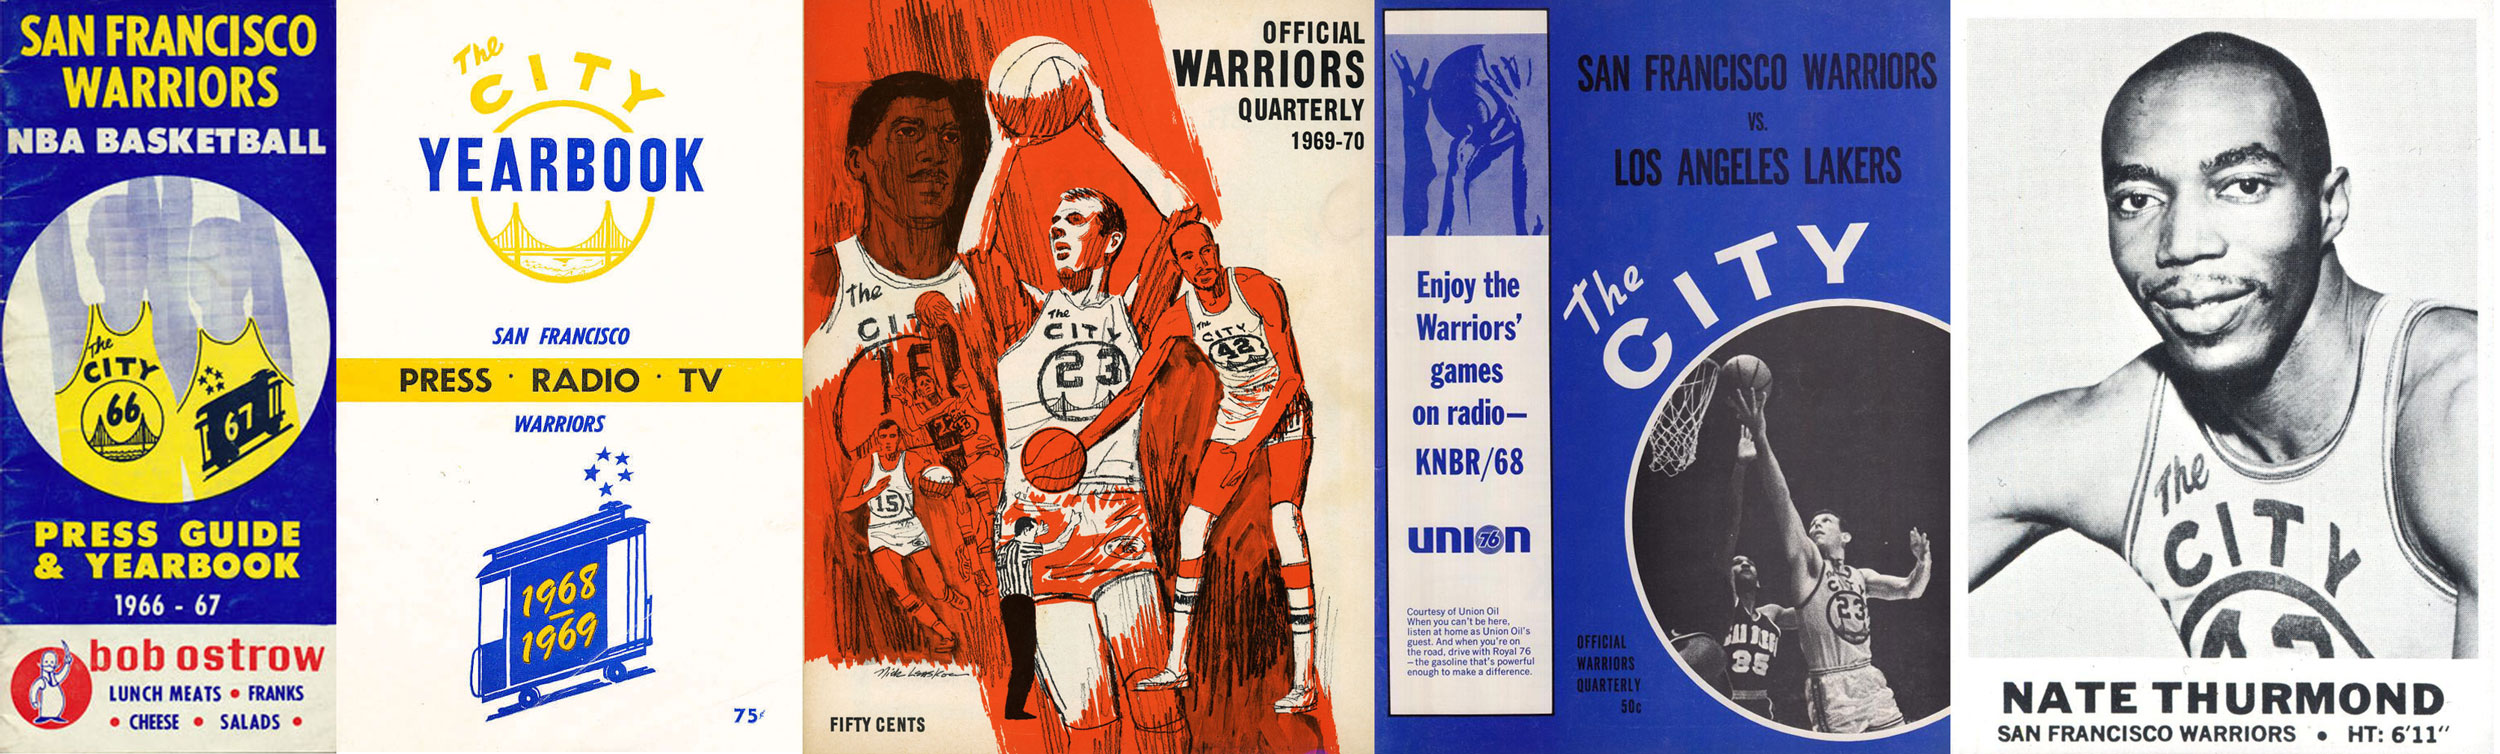 The Warriors, Their Classic “City” Uniforms, and the All-America Guard Who  Created Them — Todd Radom Design